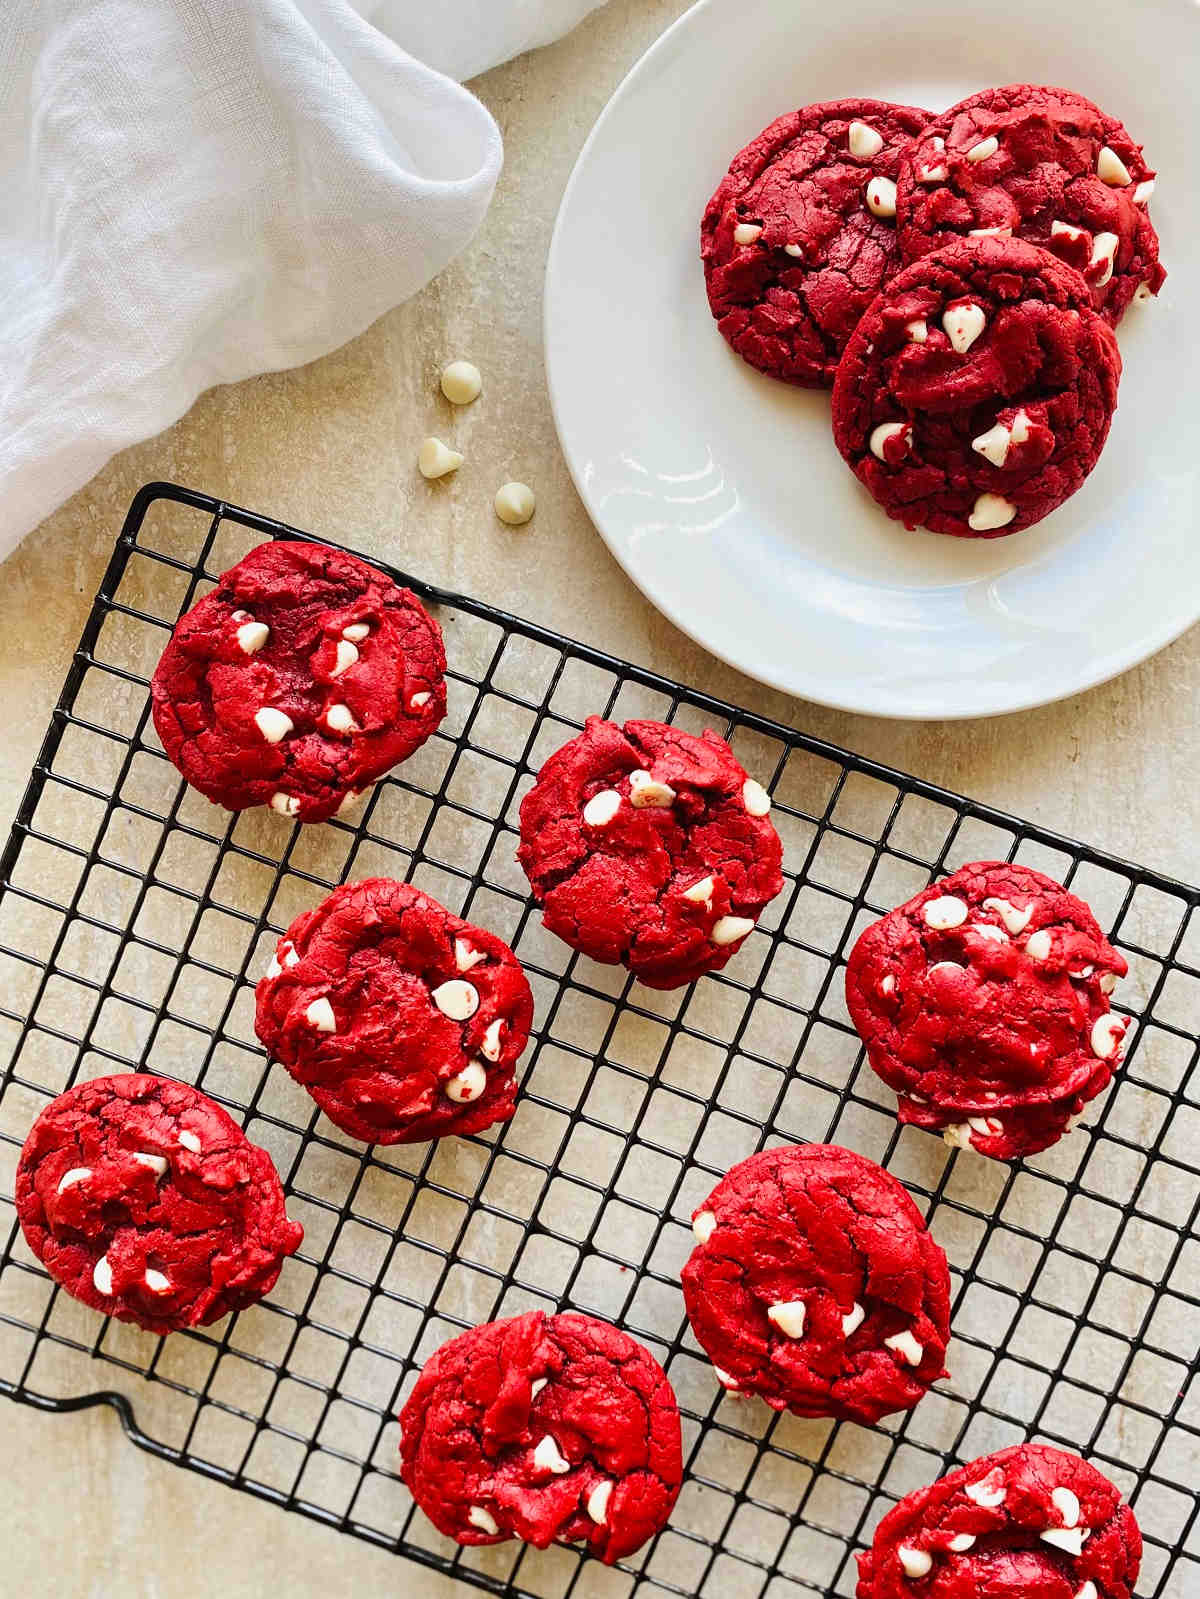 duncan hines red velvet cookies on a plate and cooling rack